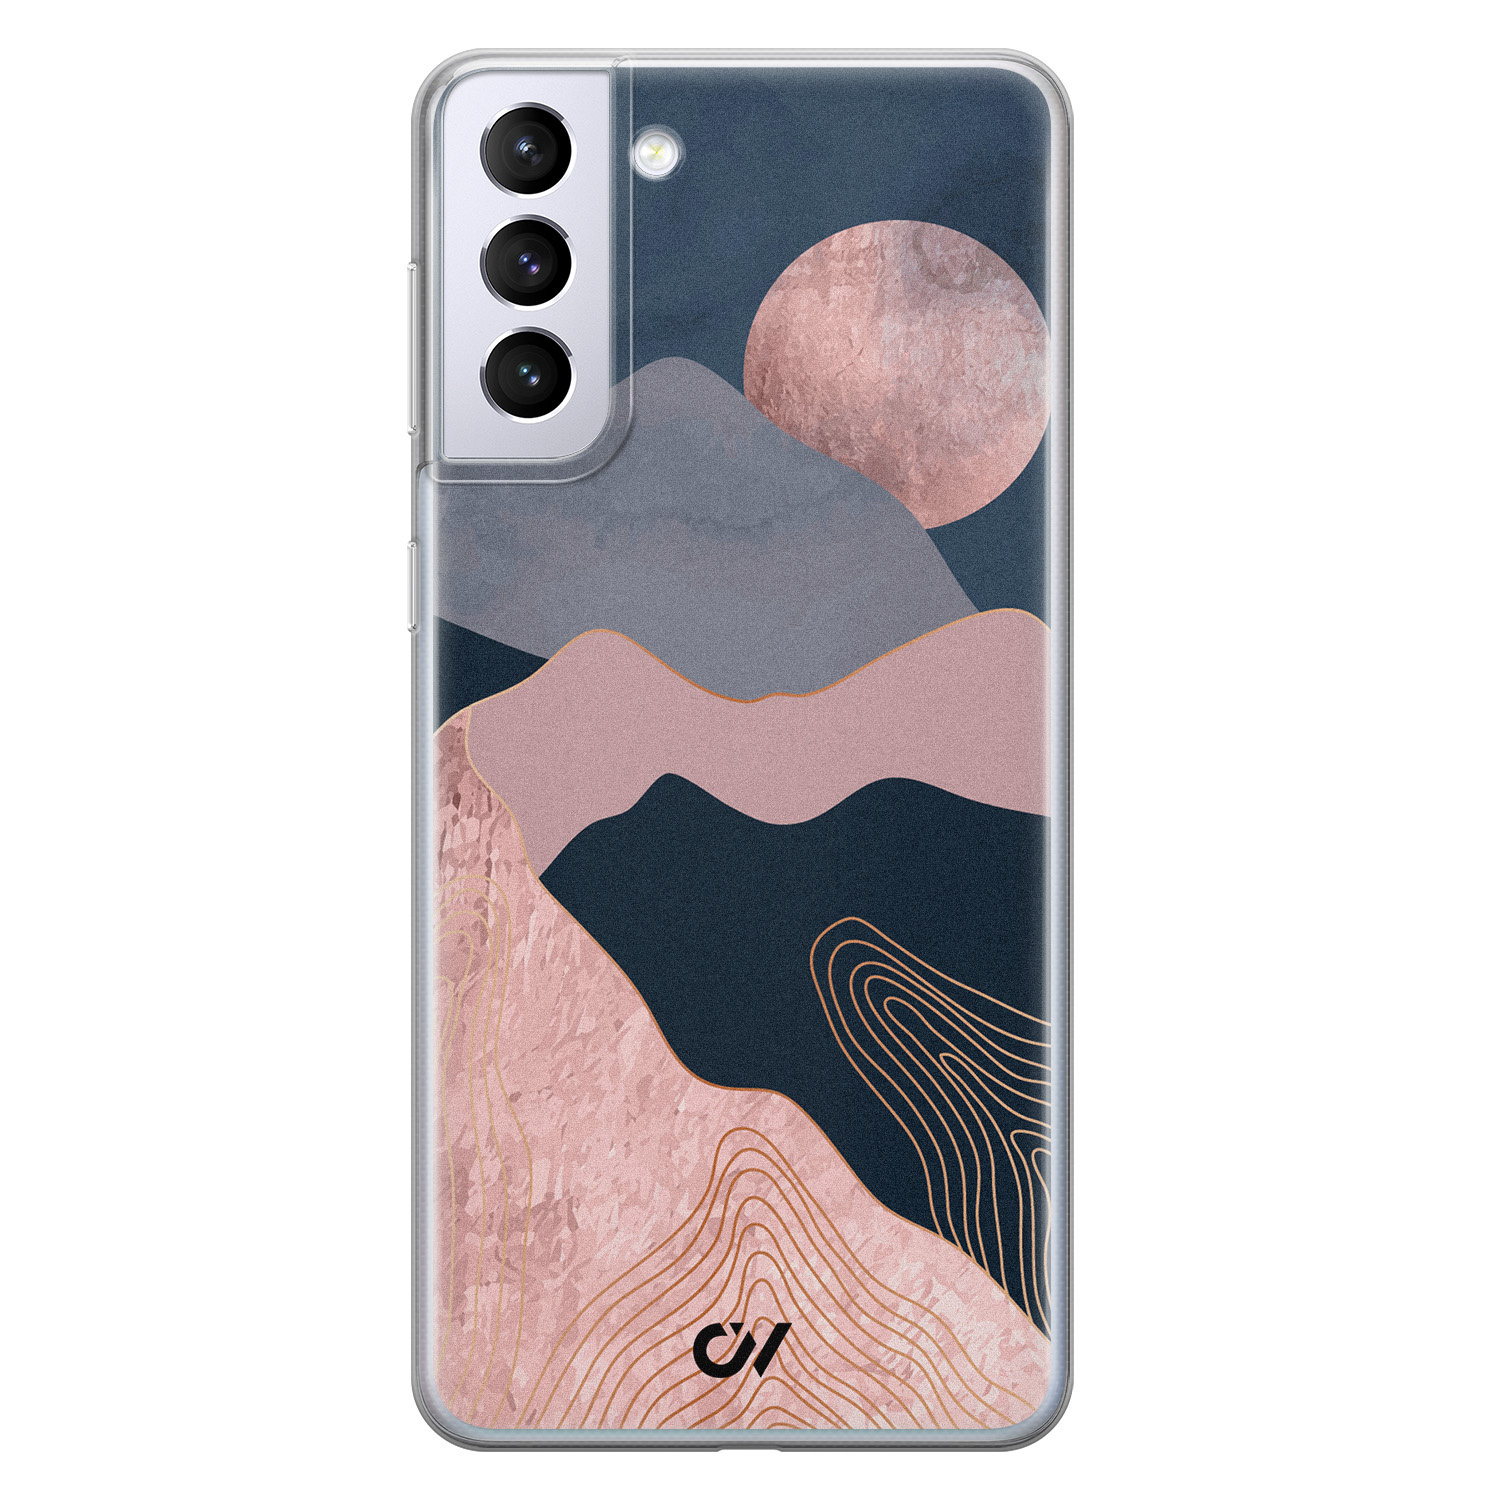 Casevibes Samsung Galaxy S21 Plus hoesje siliconen - Landscape Rosegold